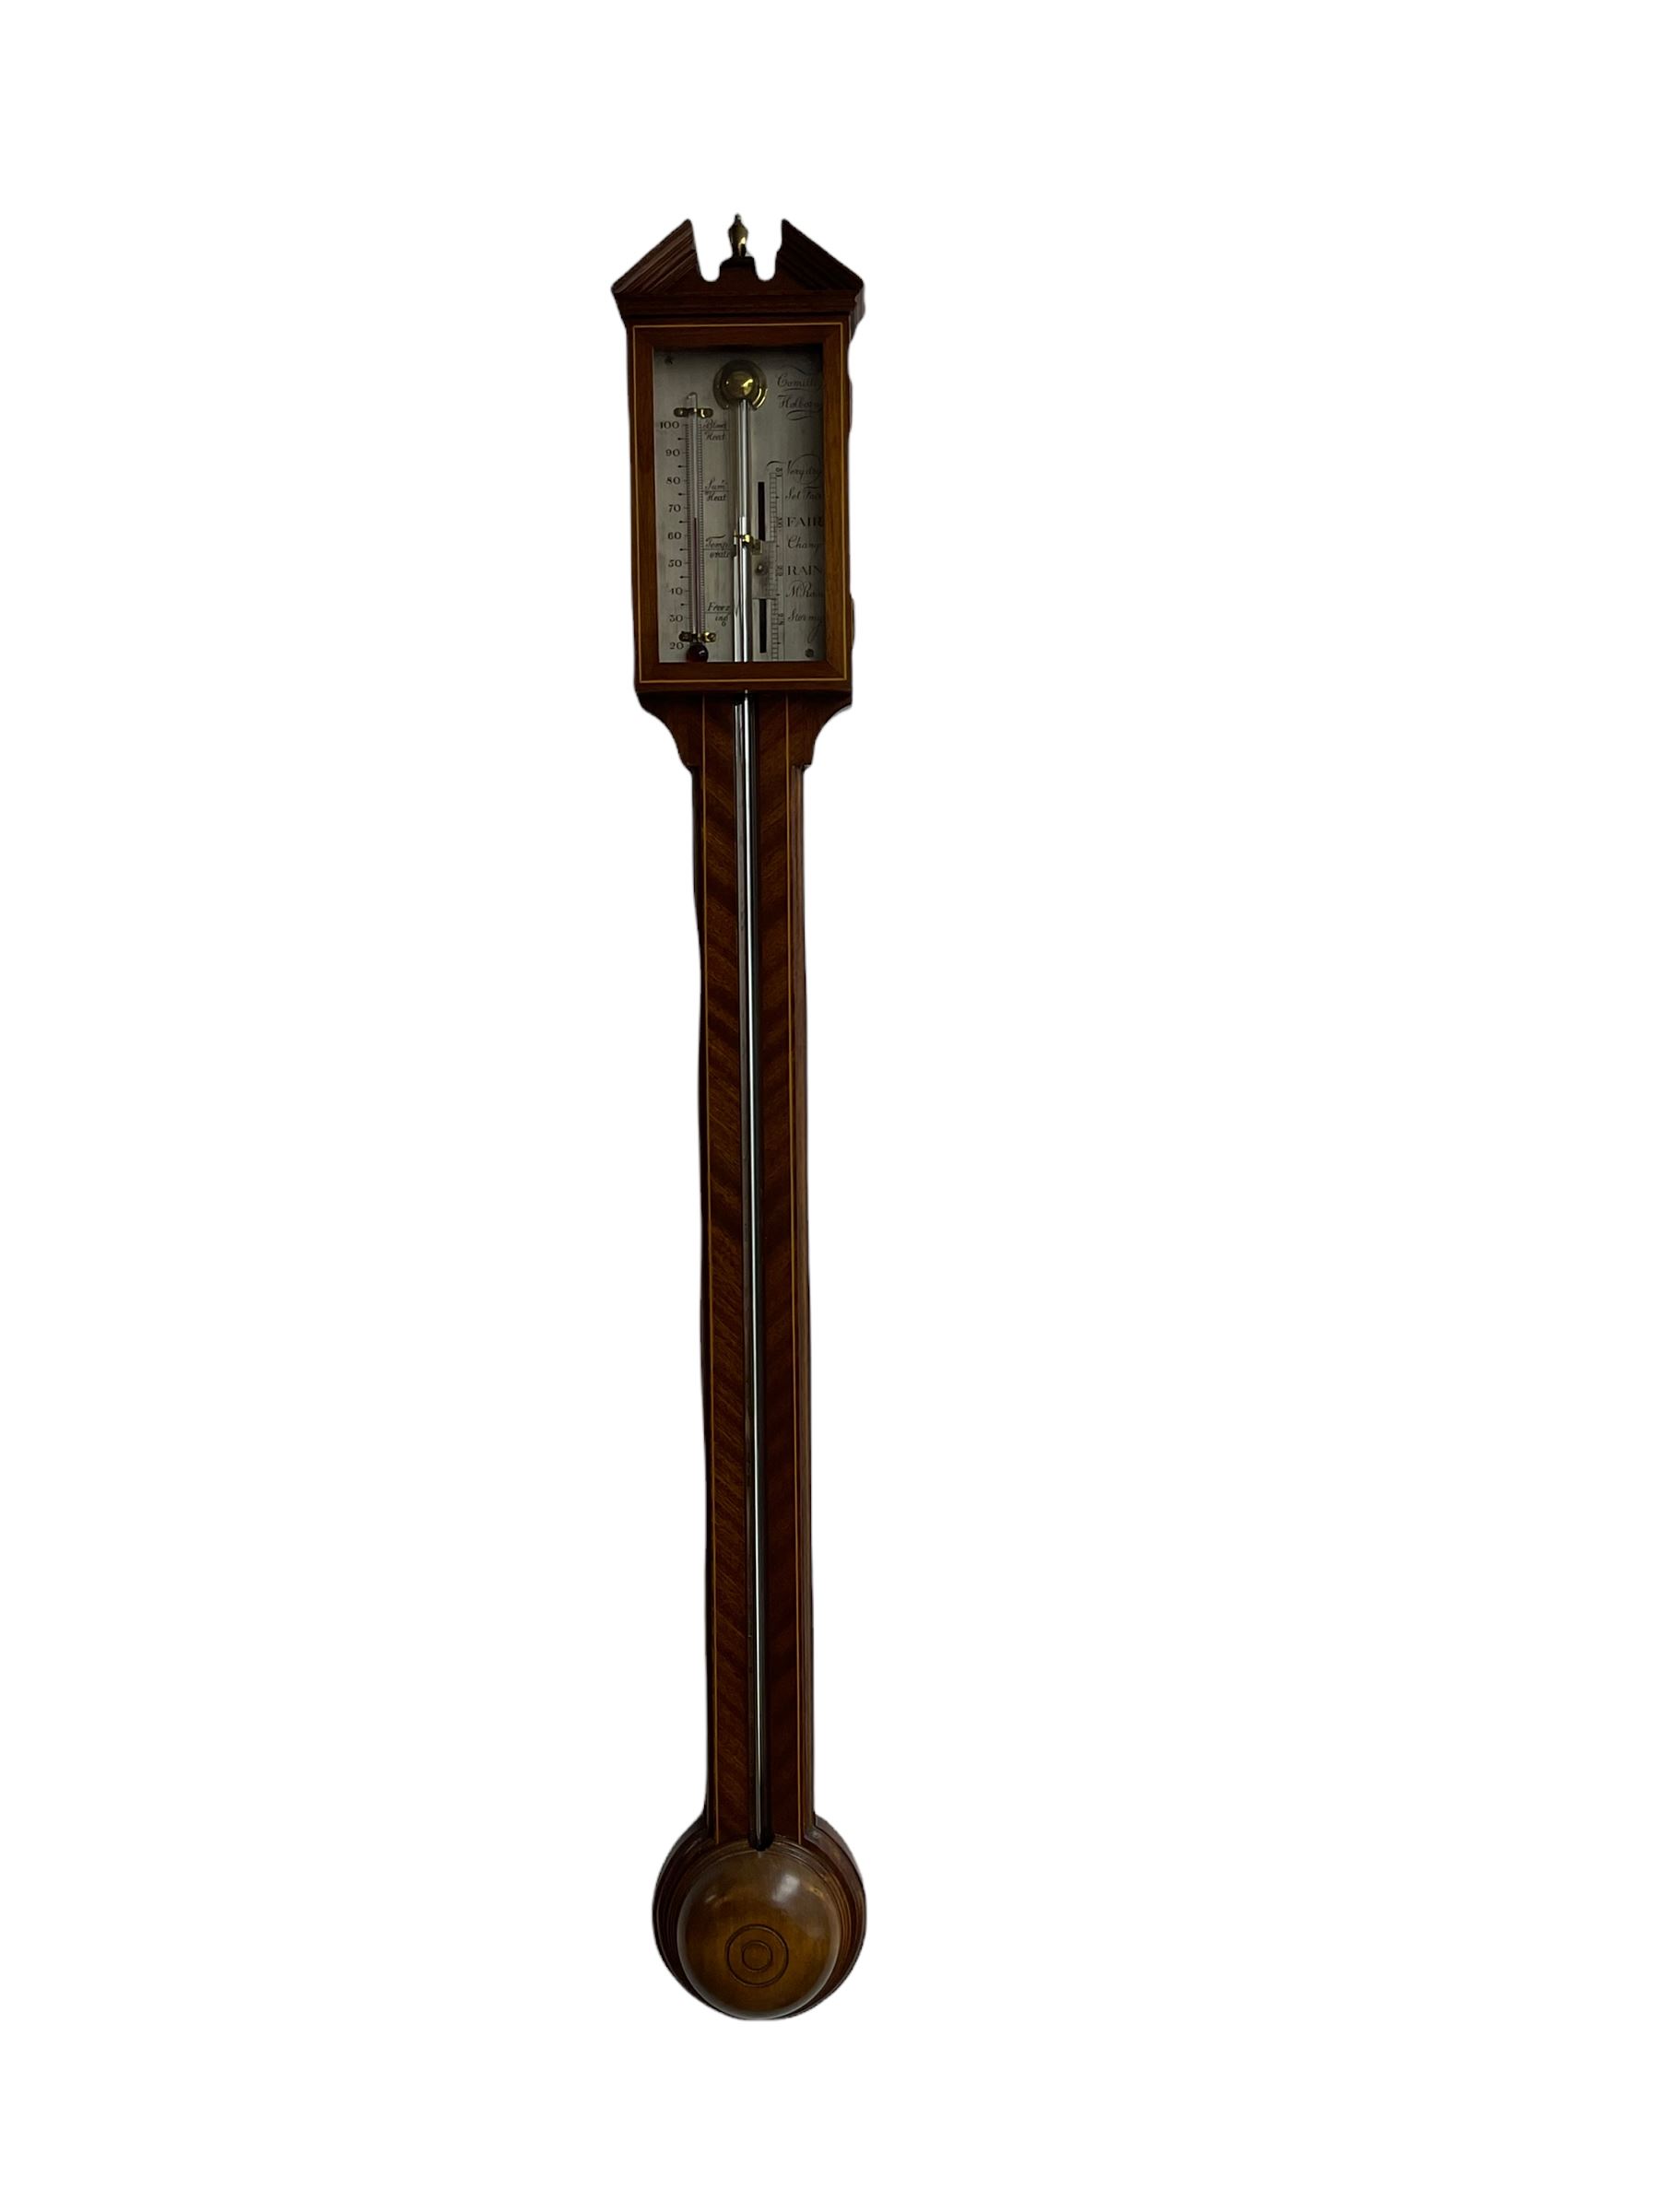 A 20th century mercury stick barometer in an earlier 18th century styled Mahogany case with satinwo